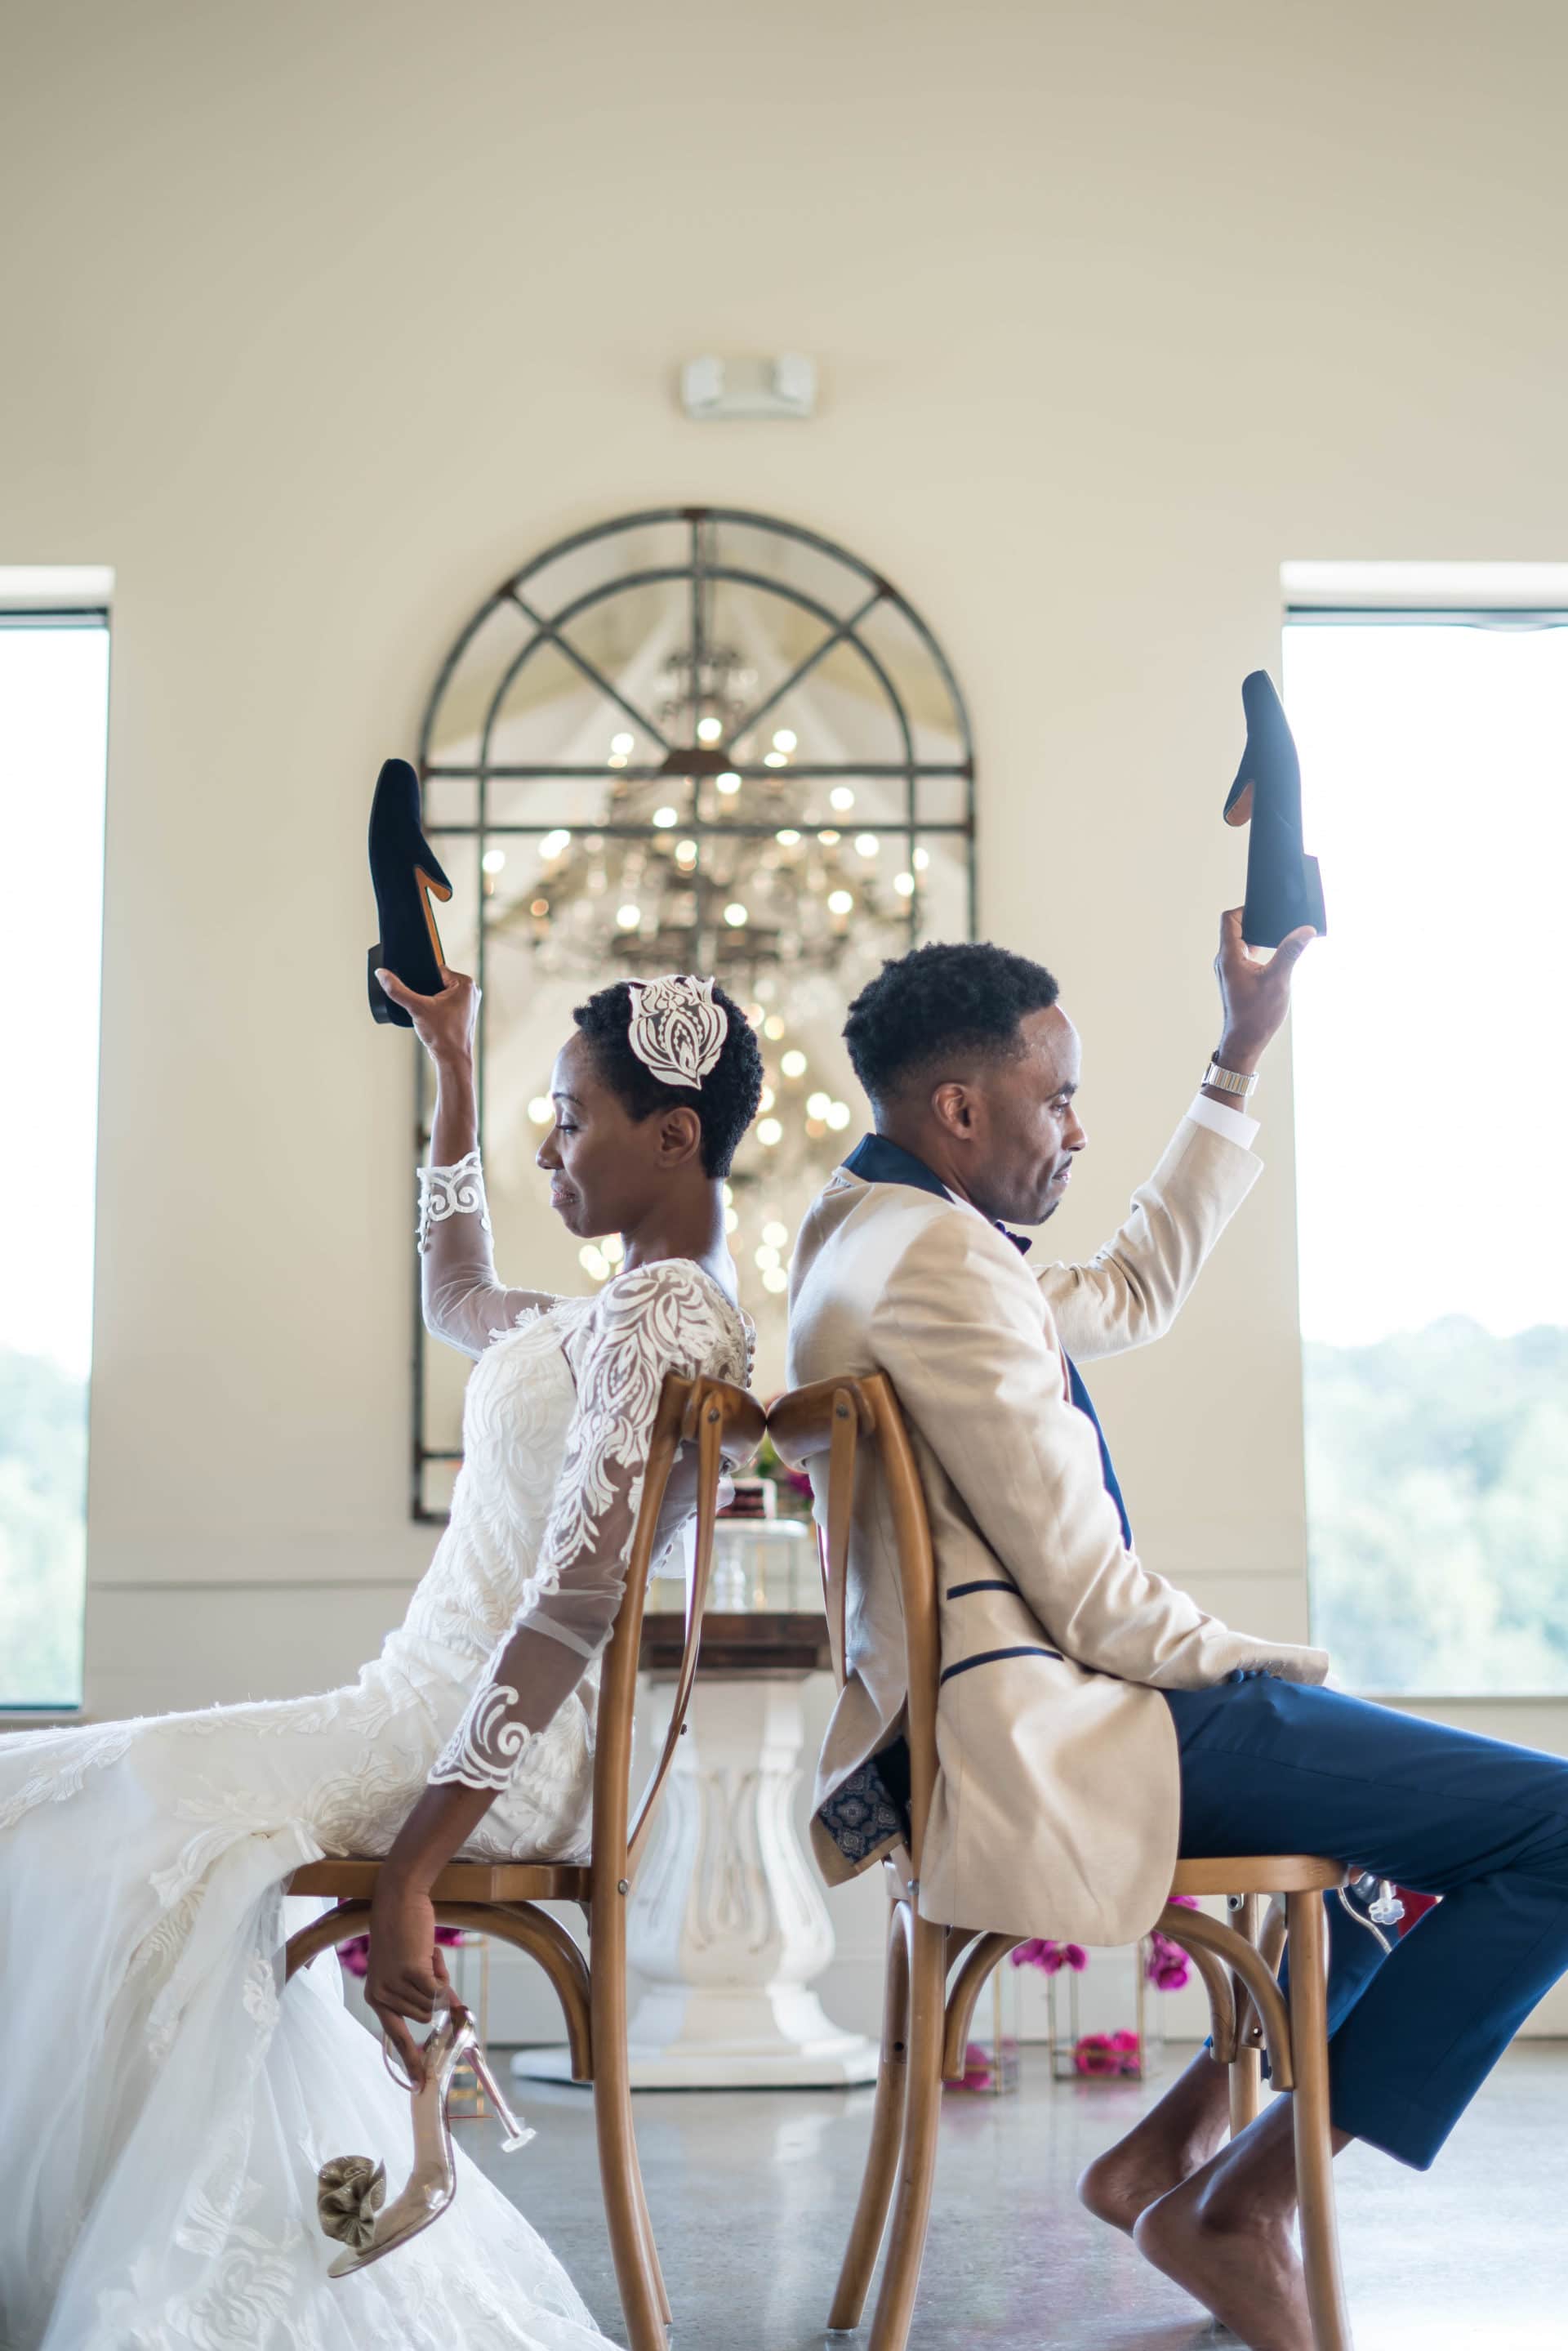 Bridal Bliss: Yaaas, Love! Edna and Eric's Georgia Wedding Just Dripped With Style